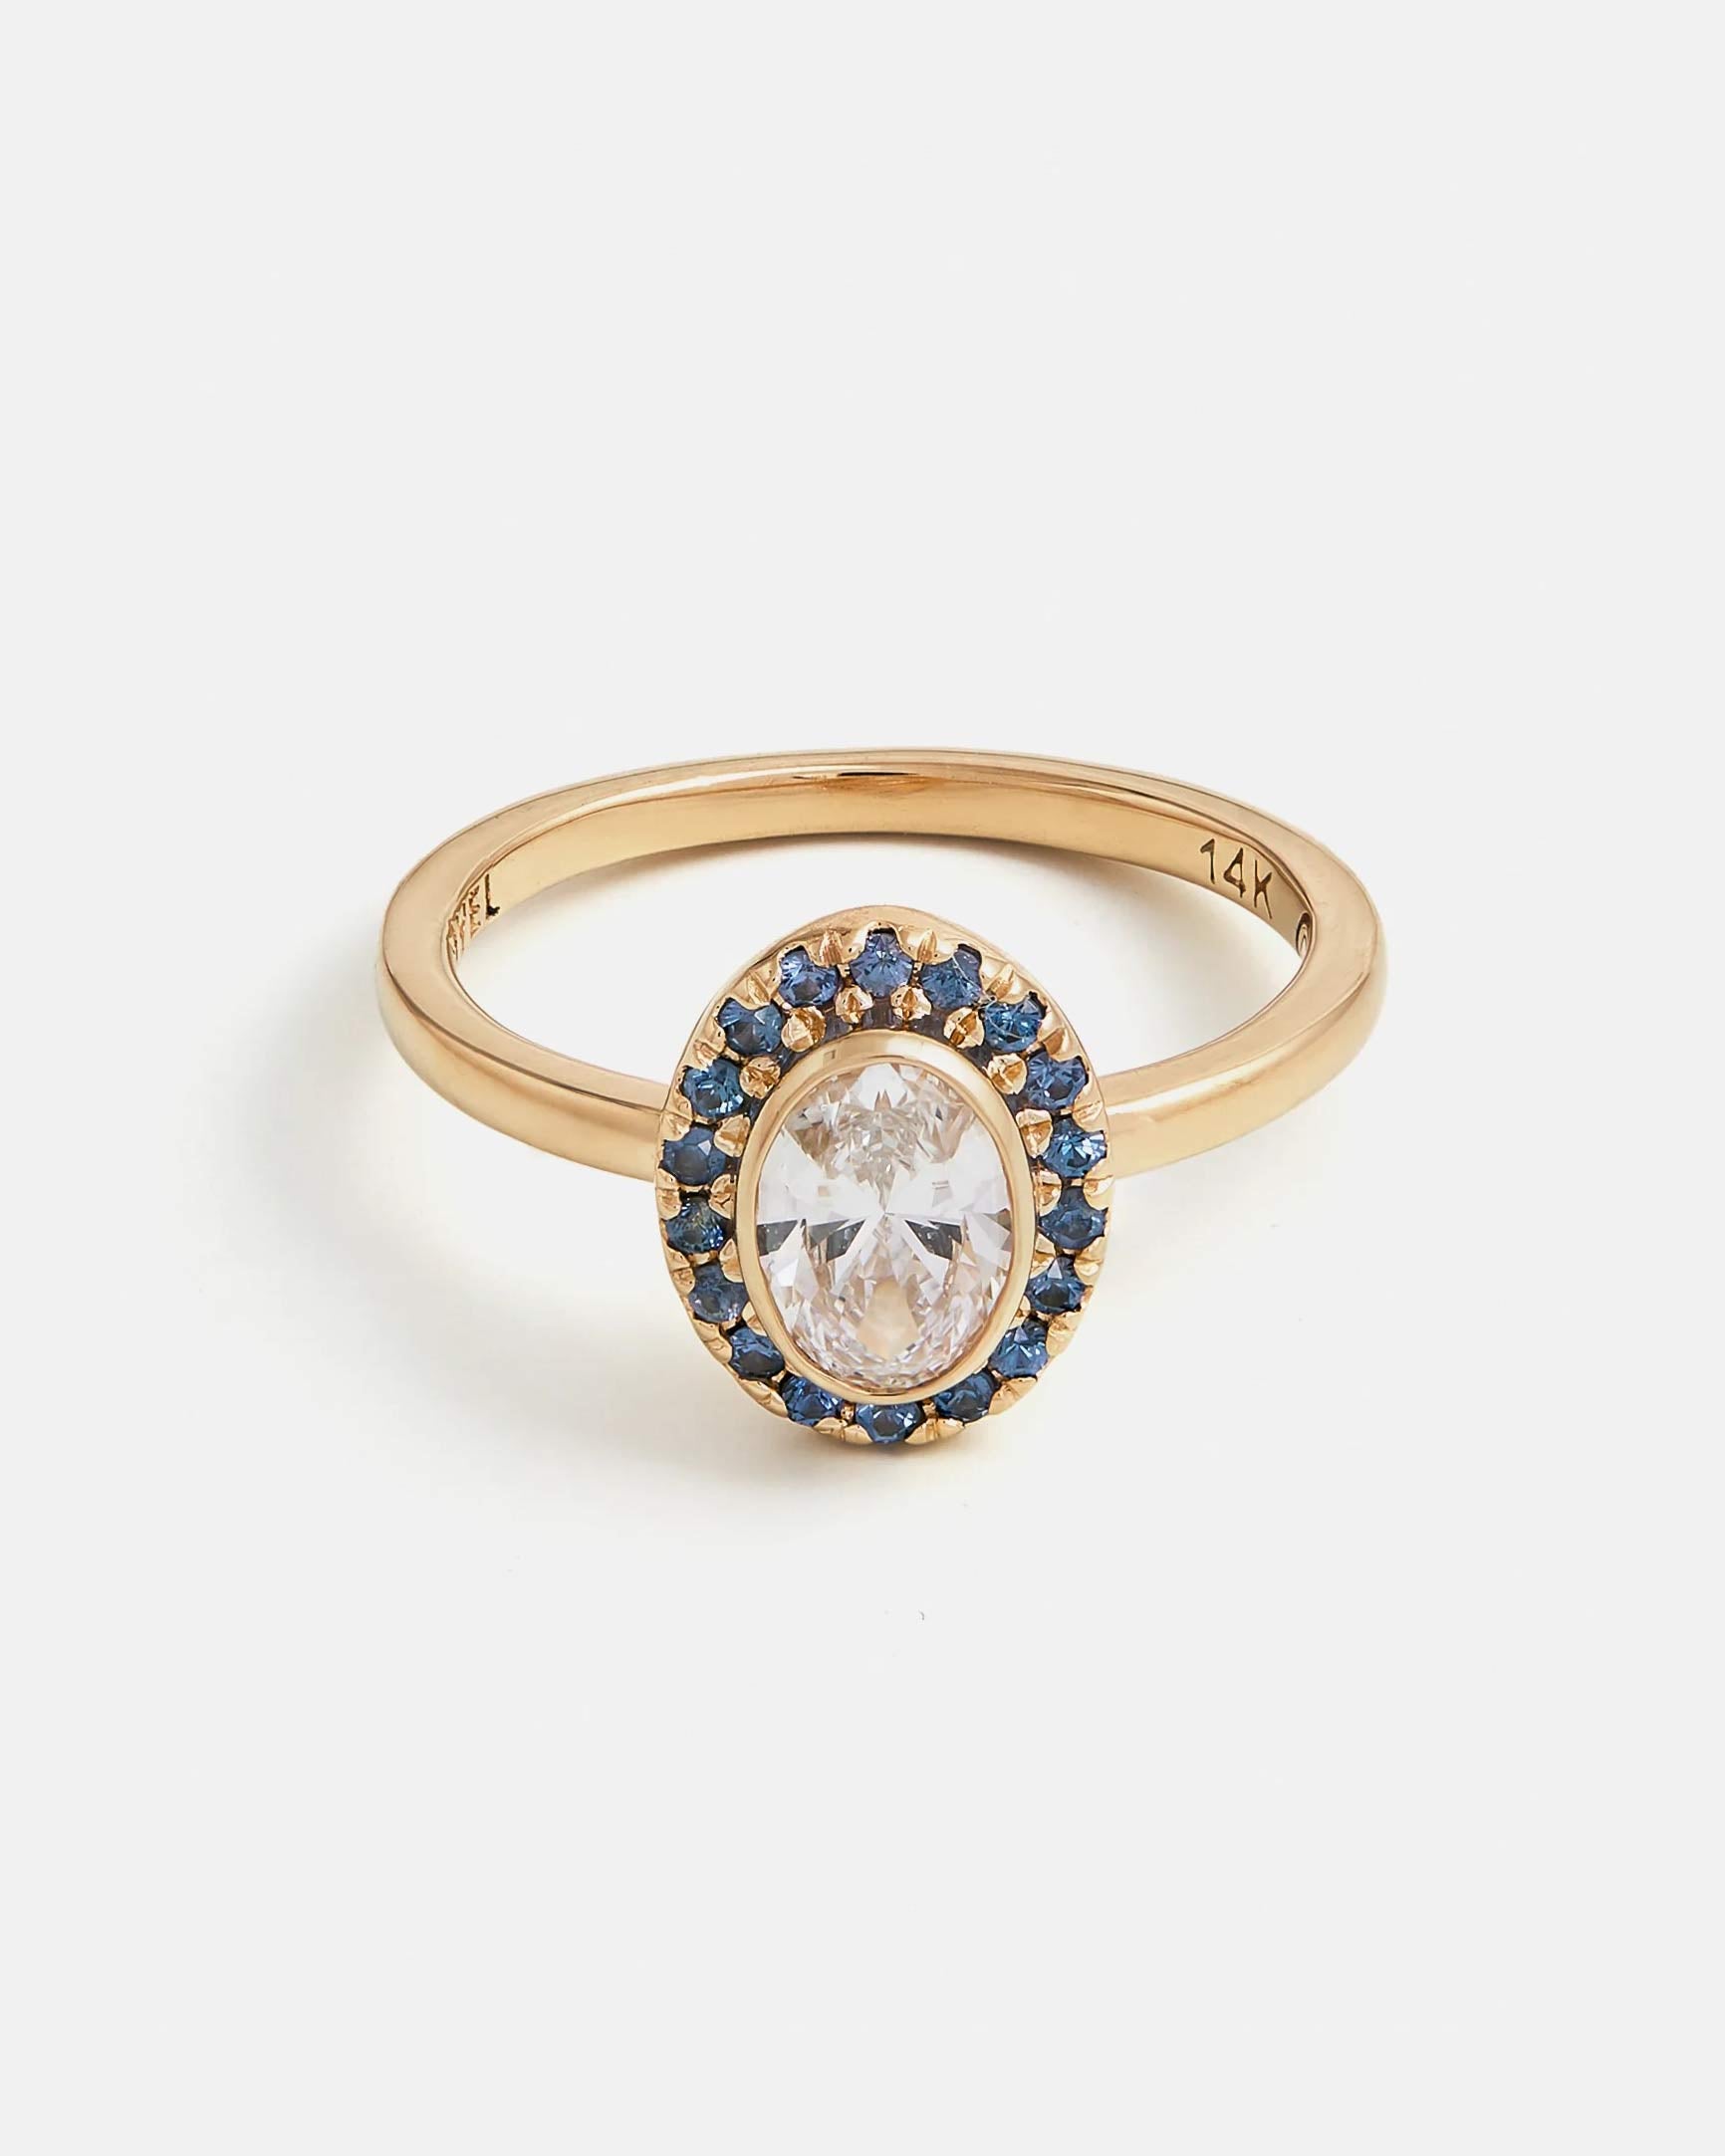 Retro Ring in 14k Fairmined Gold with Lab-Grown Diamond and Blue Spinels